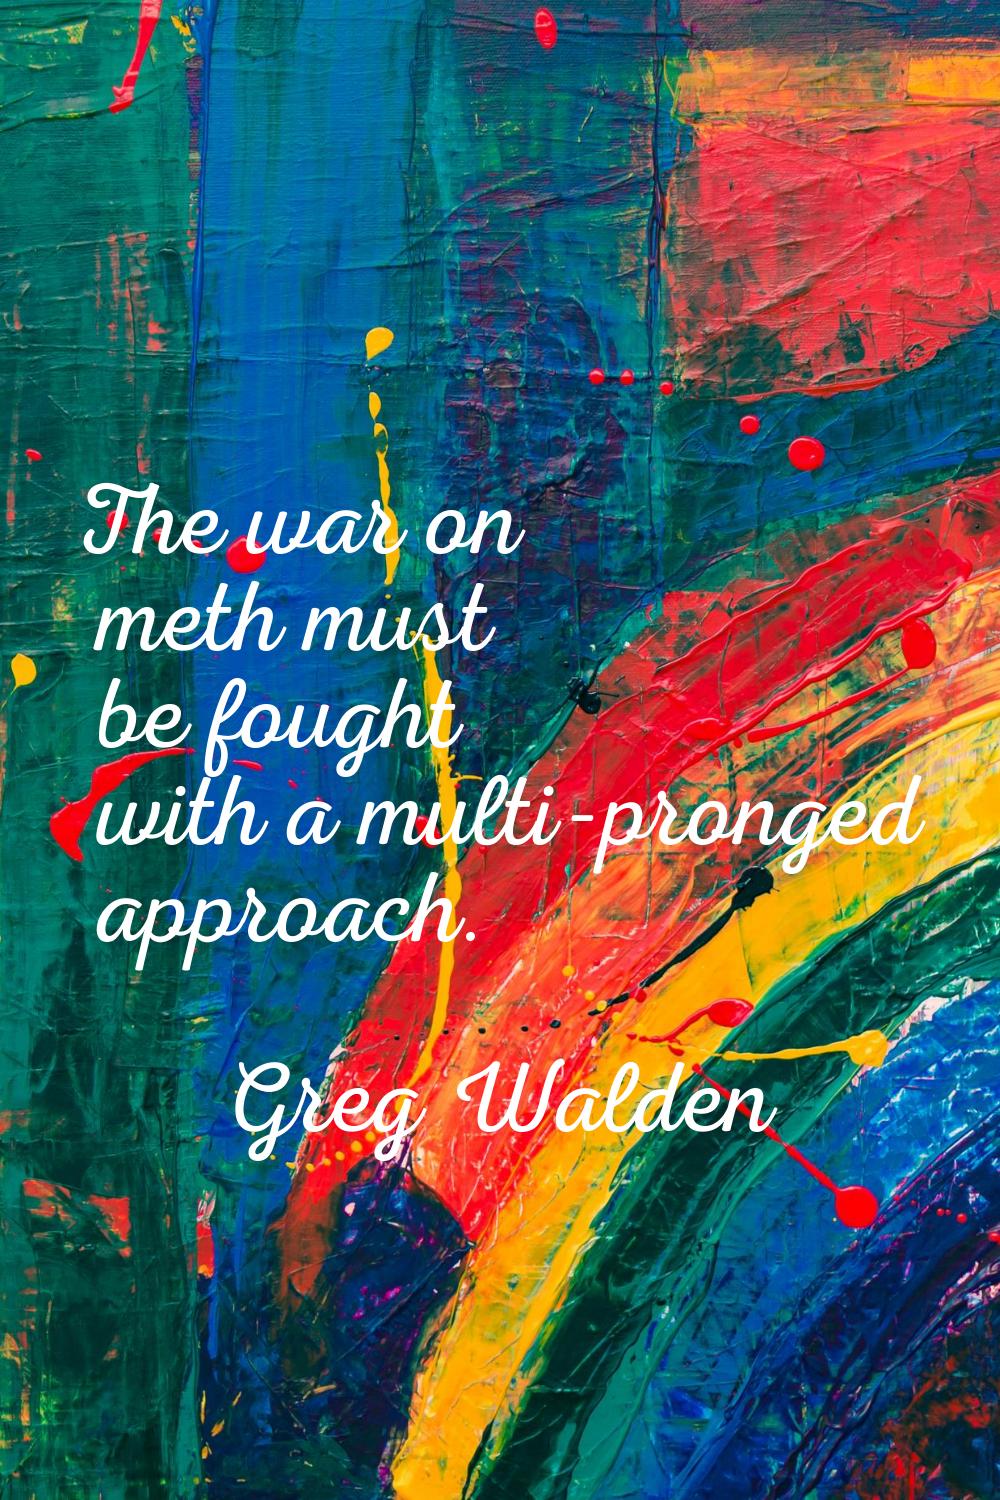 The war on meth must be fought with a multi-pronged approach.